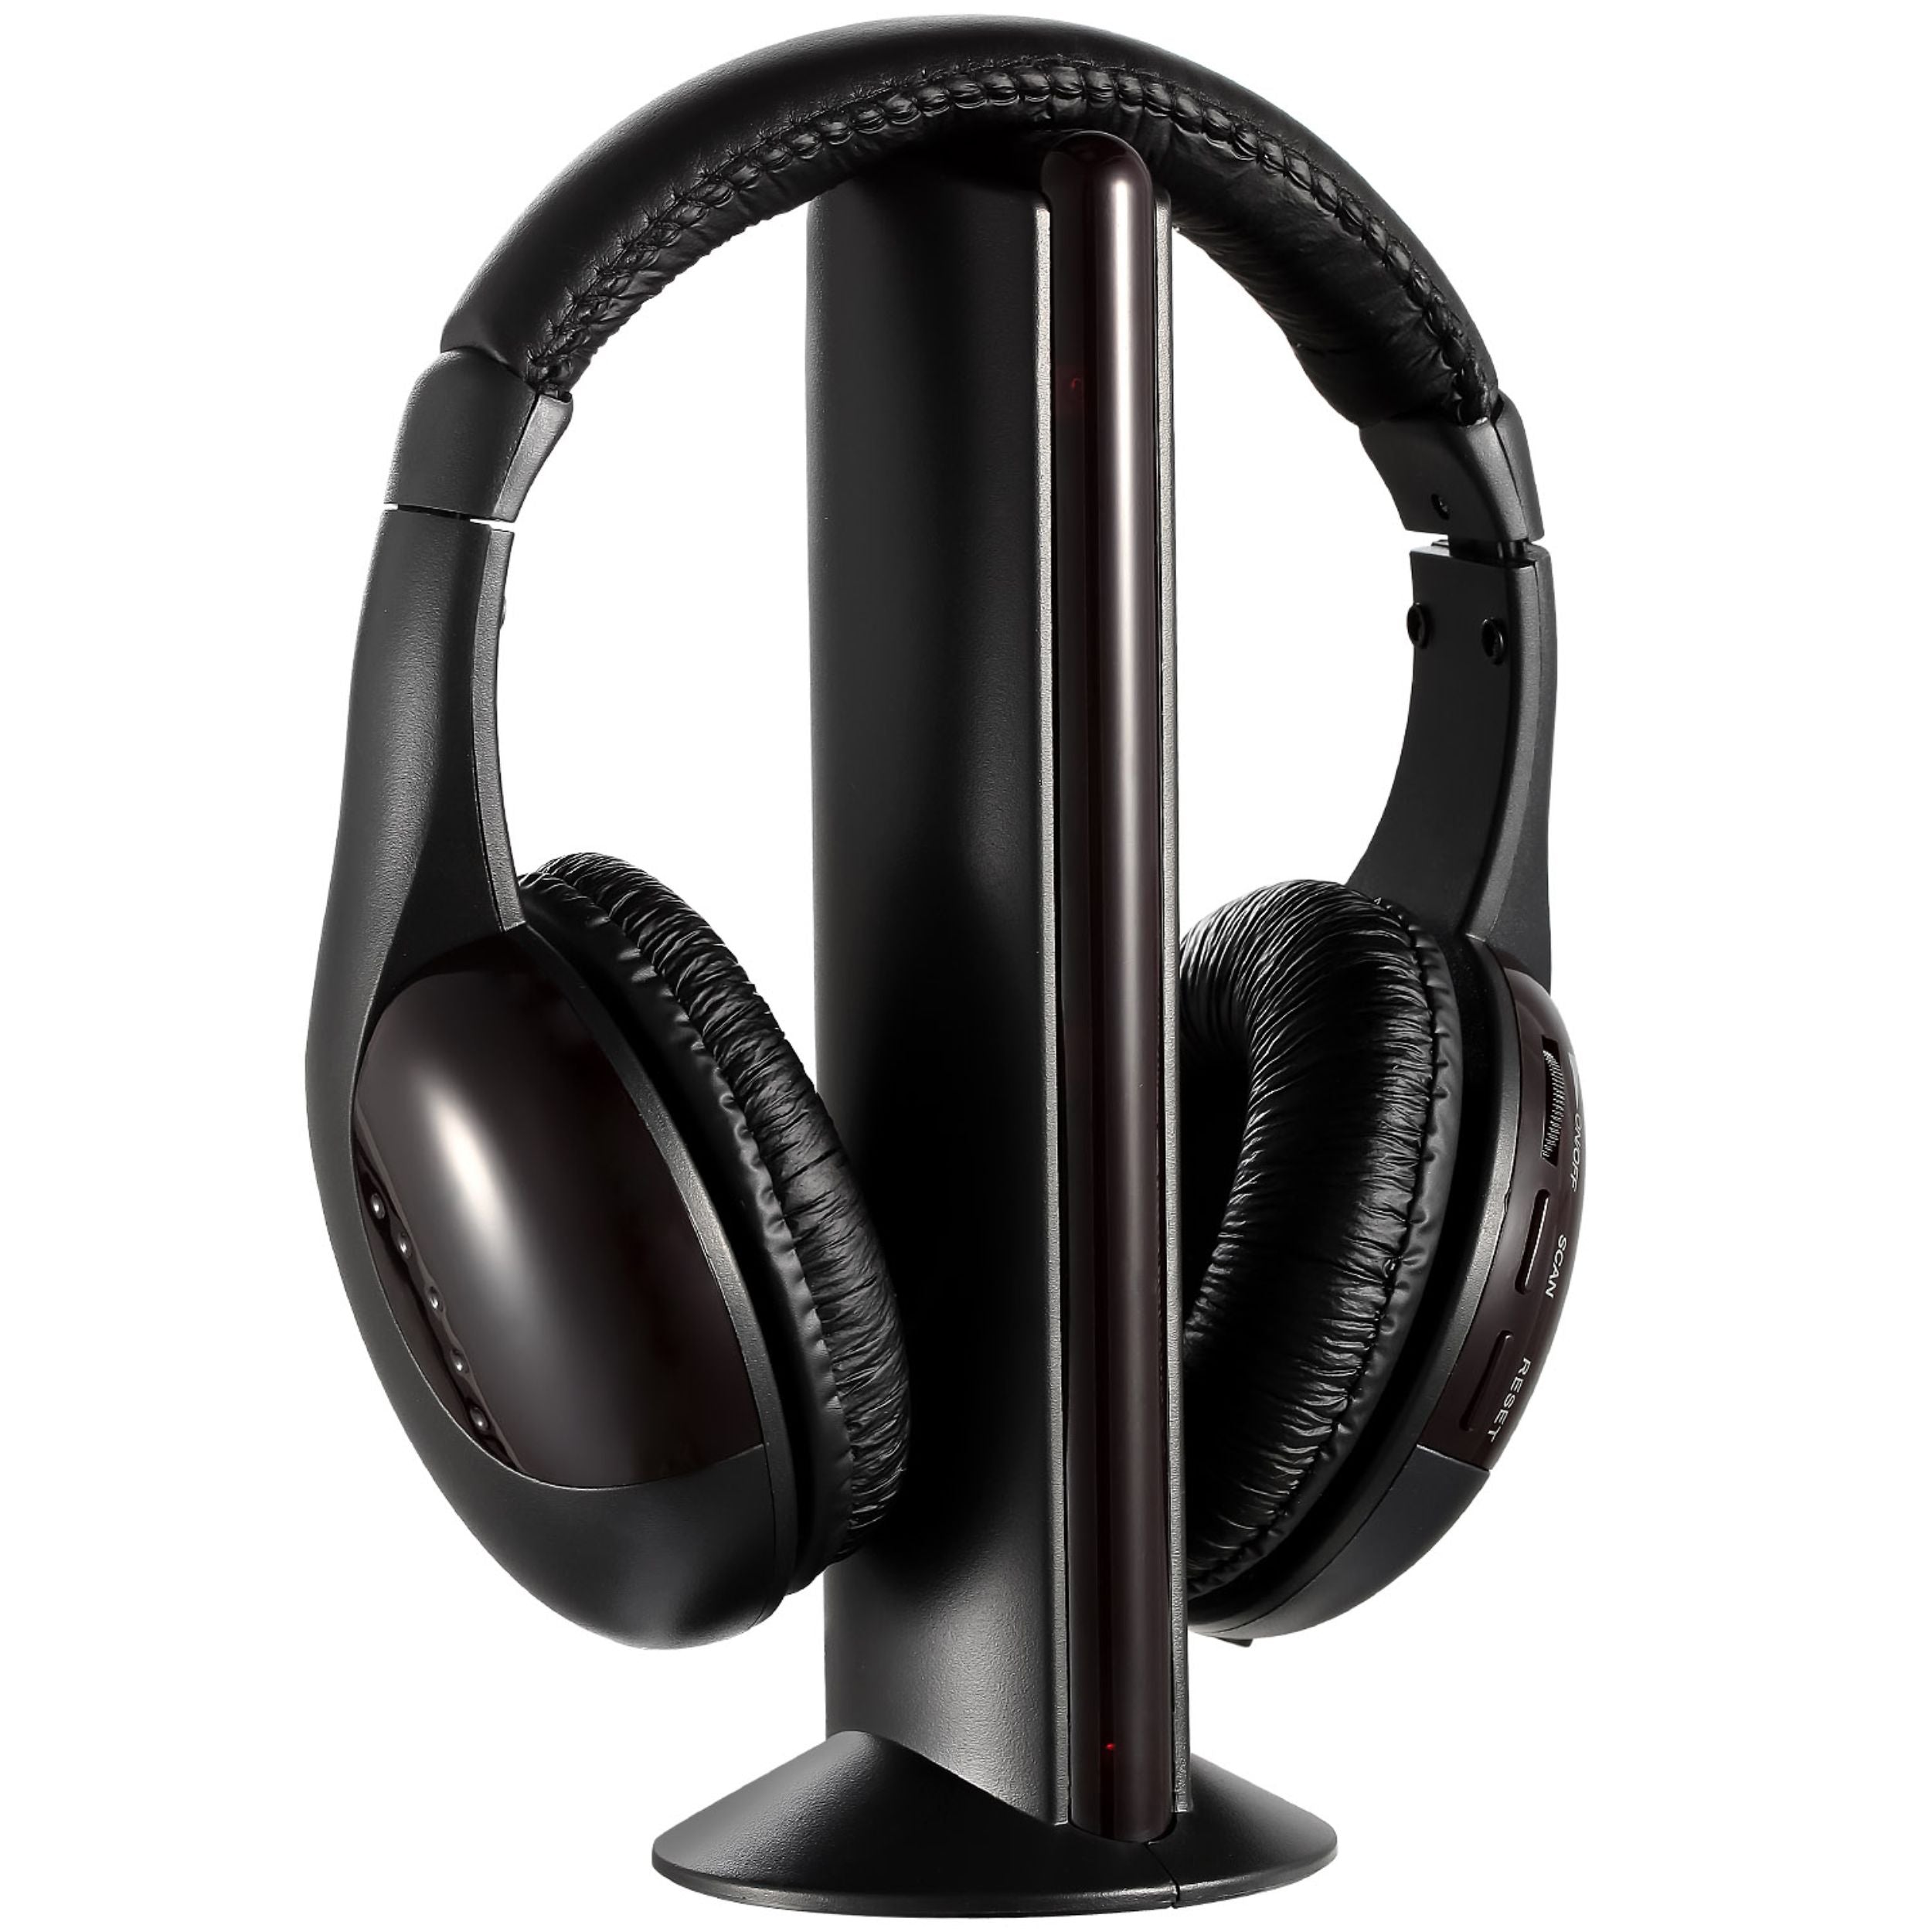 title:Wireless RF Headphones with Mic, Over-Ear Headsets, 98.4ft Range, Y-shaped Cable, for TV Radio CD;color:Black